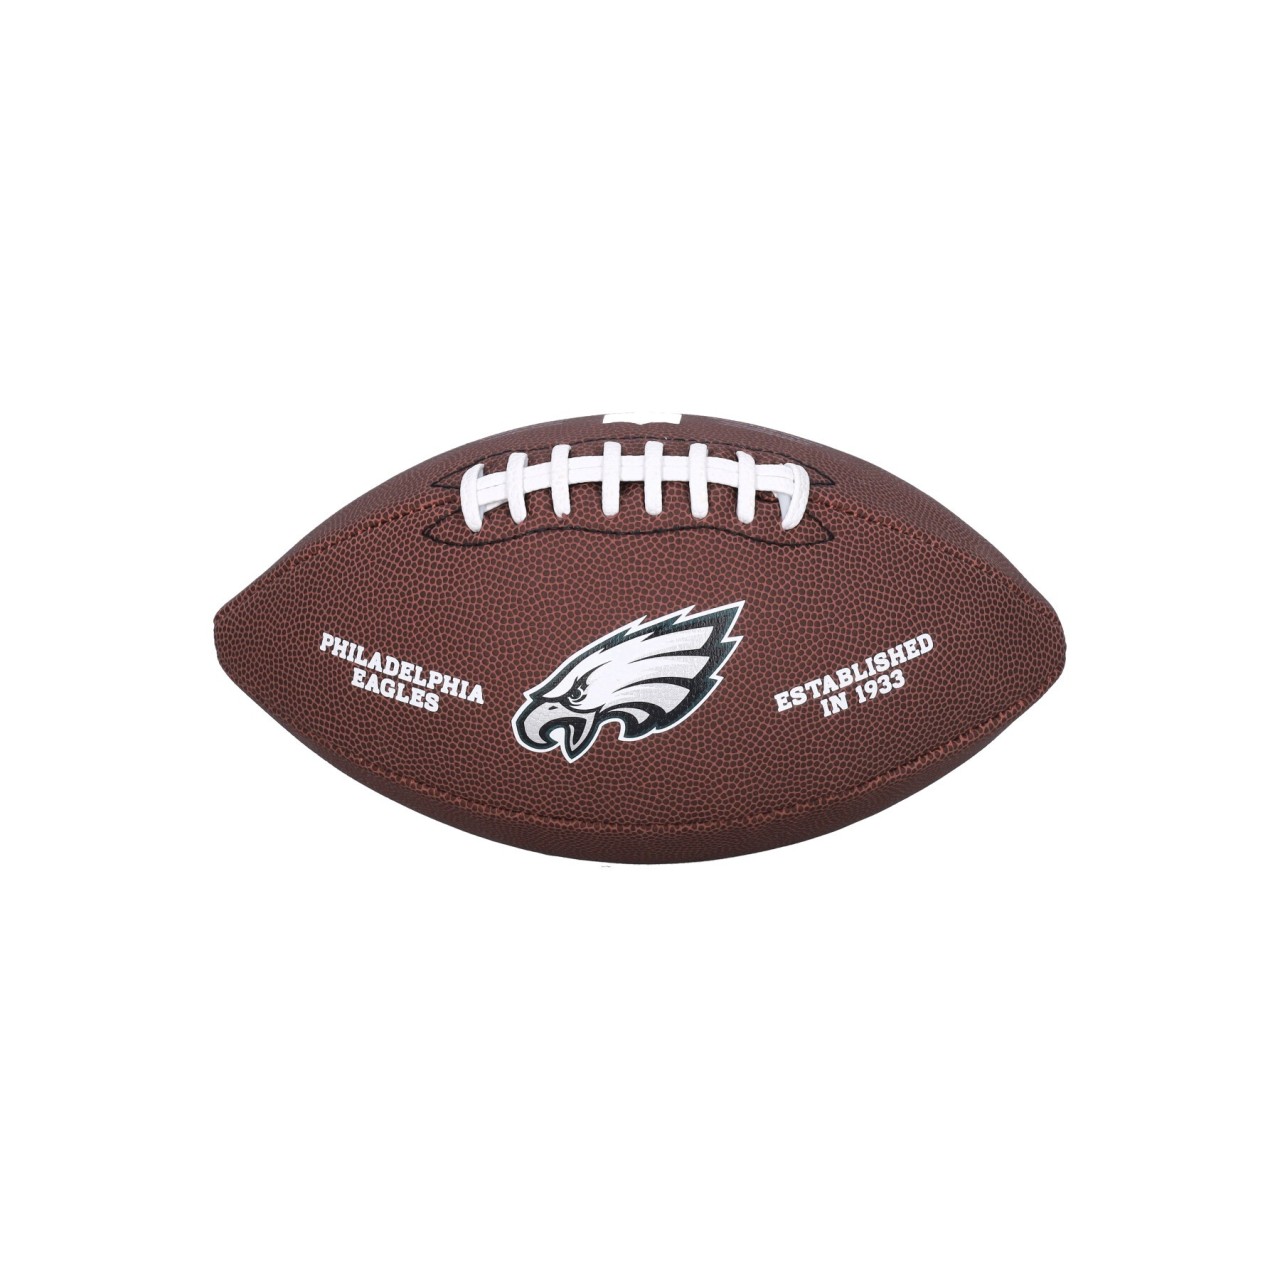 WILSON TEAM NFL LICENSED FOOTBALL PHIEAG WTF1748XBPH